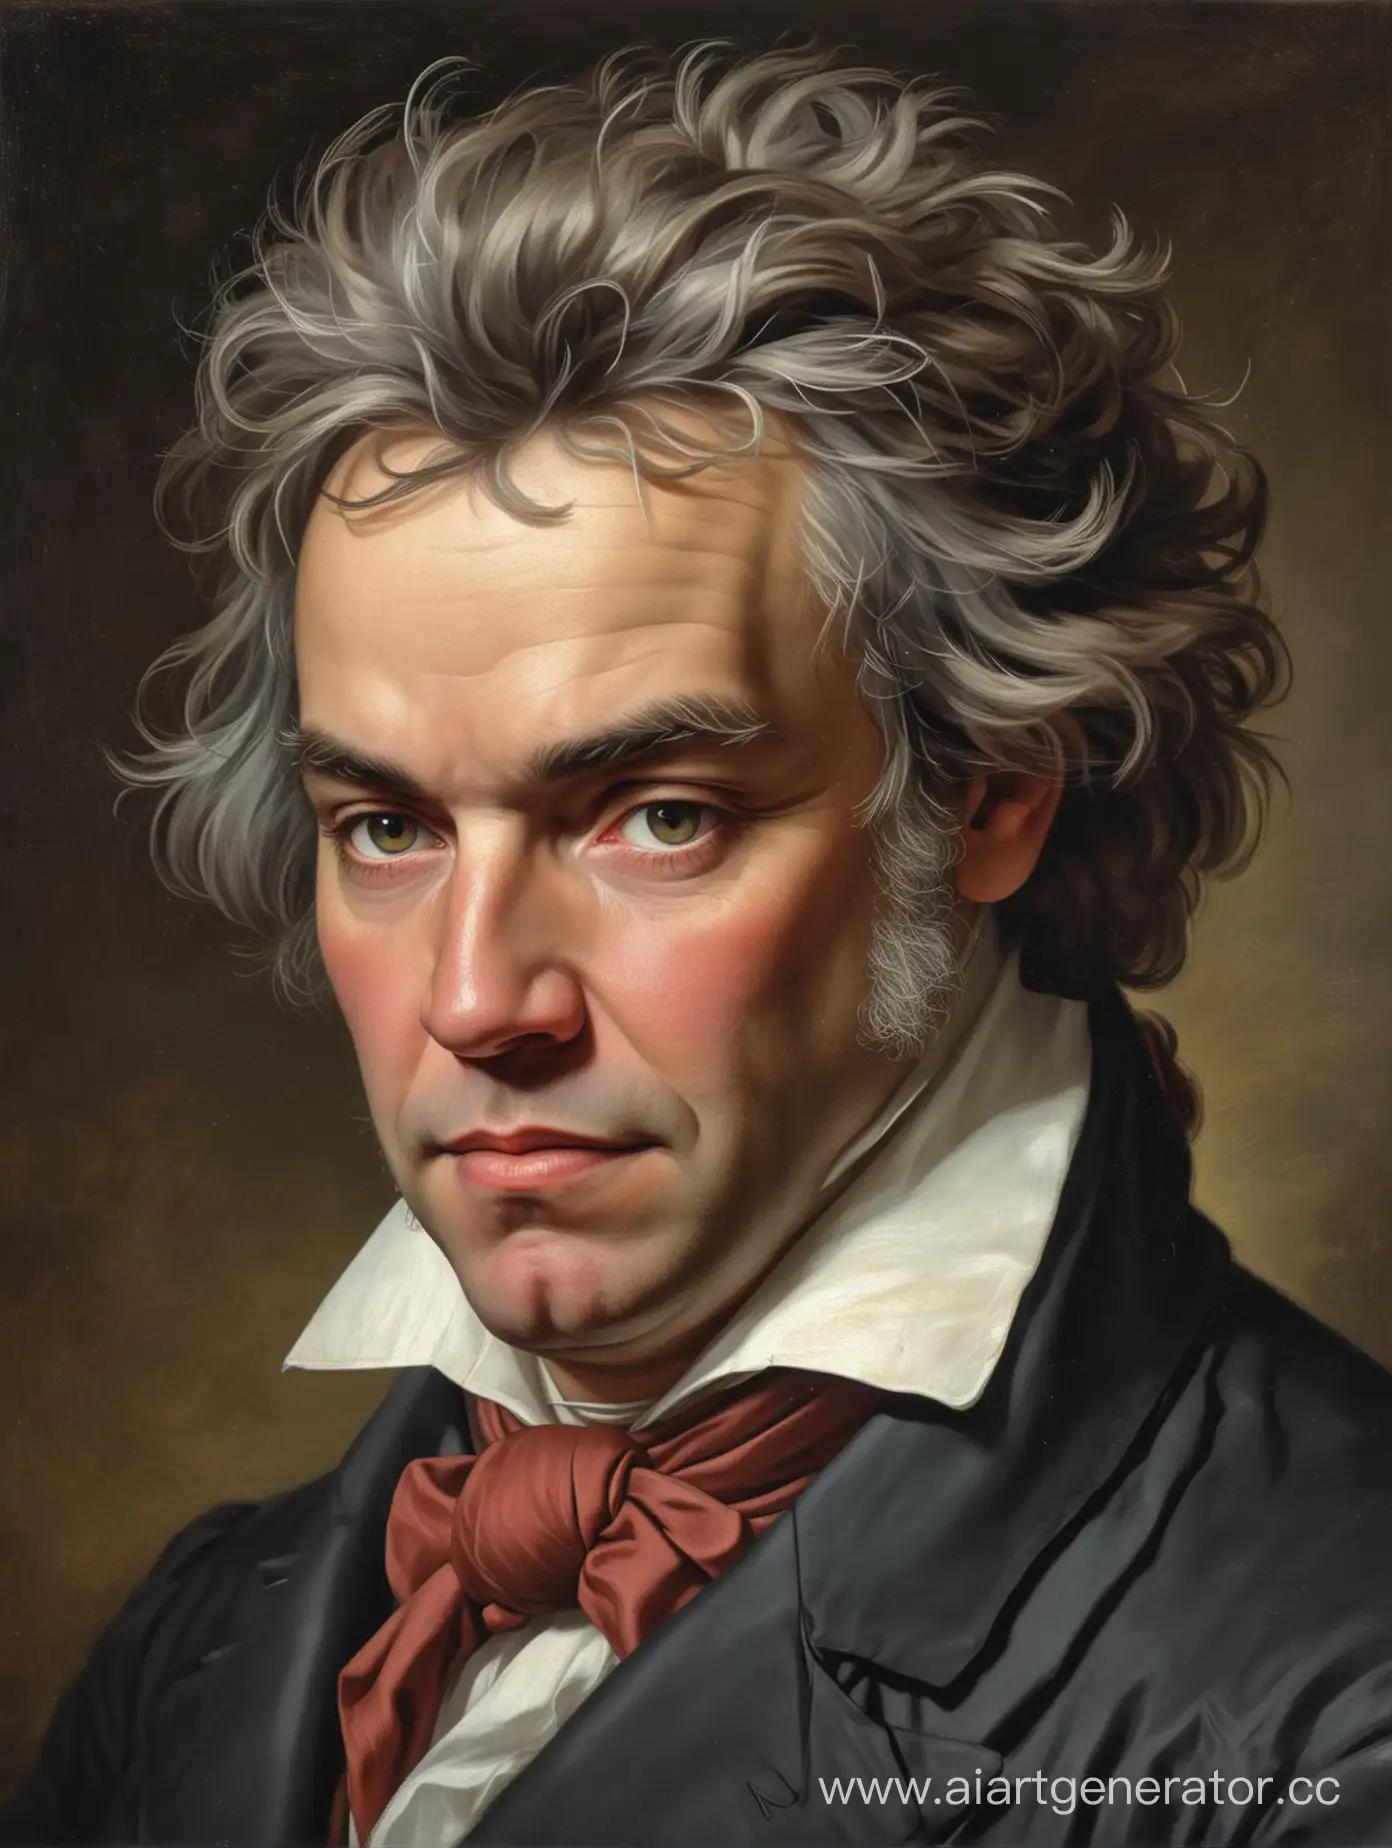 Ludwig-van-Beethoven-Portrait-Classical-Composer-in-Thoughtful-Pose